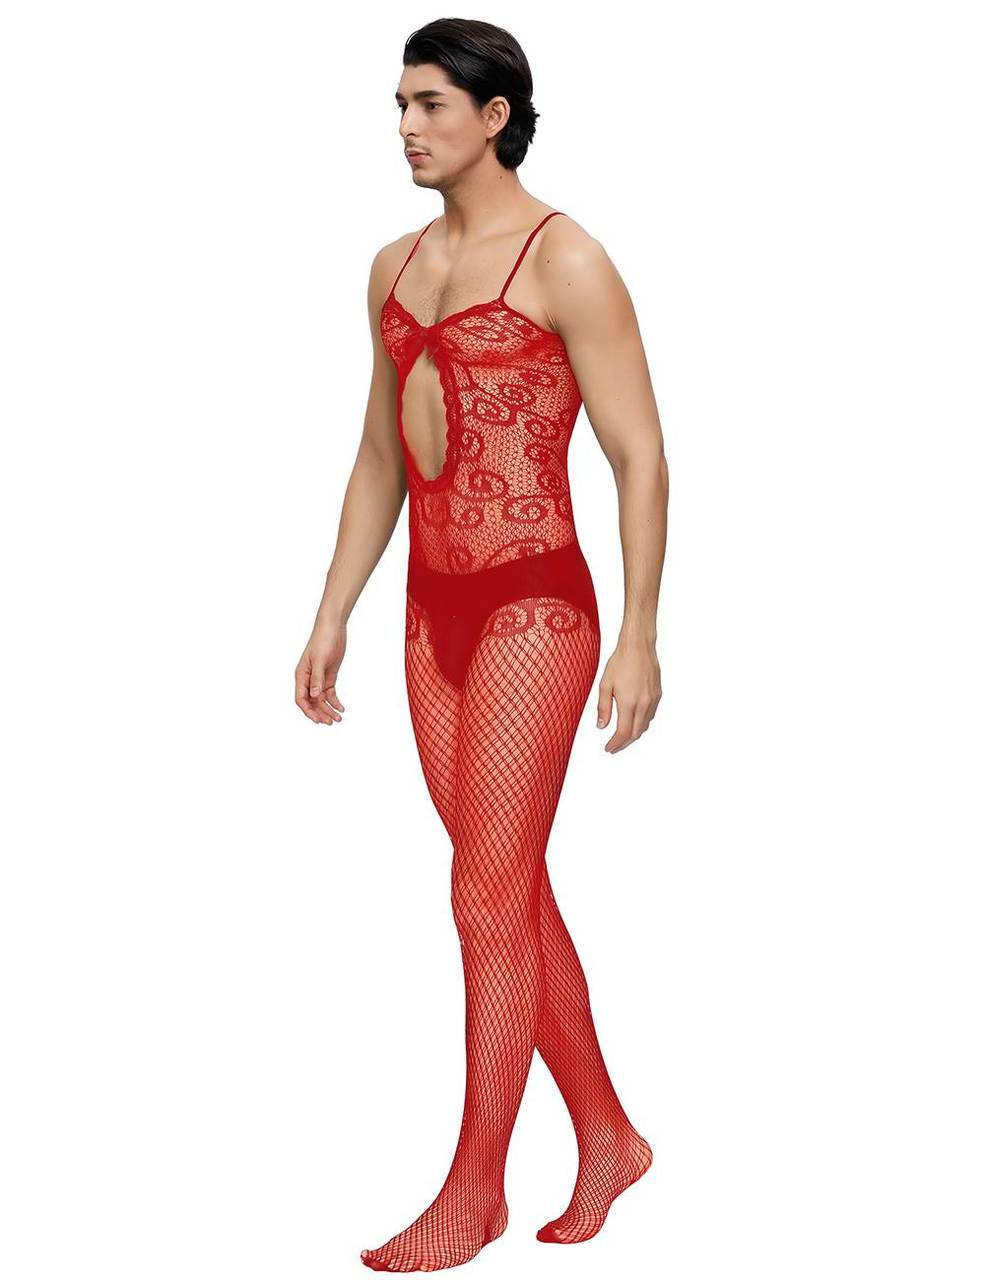 Mens Lingerie Crocheted Fishnet Bodystocking with Keyhole Front Red